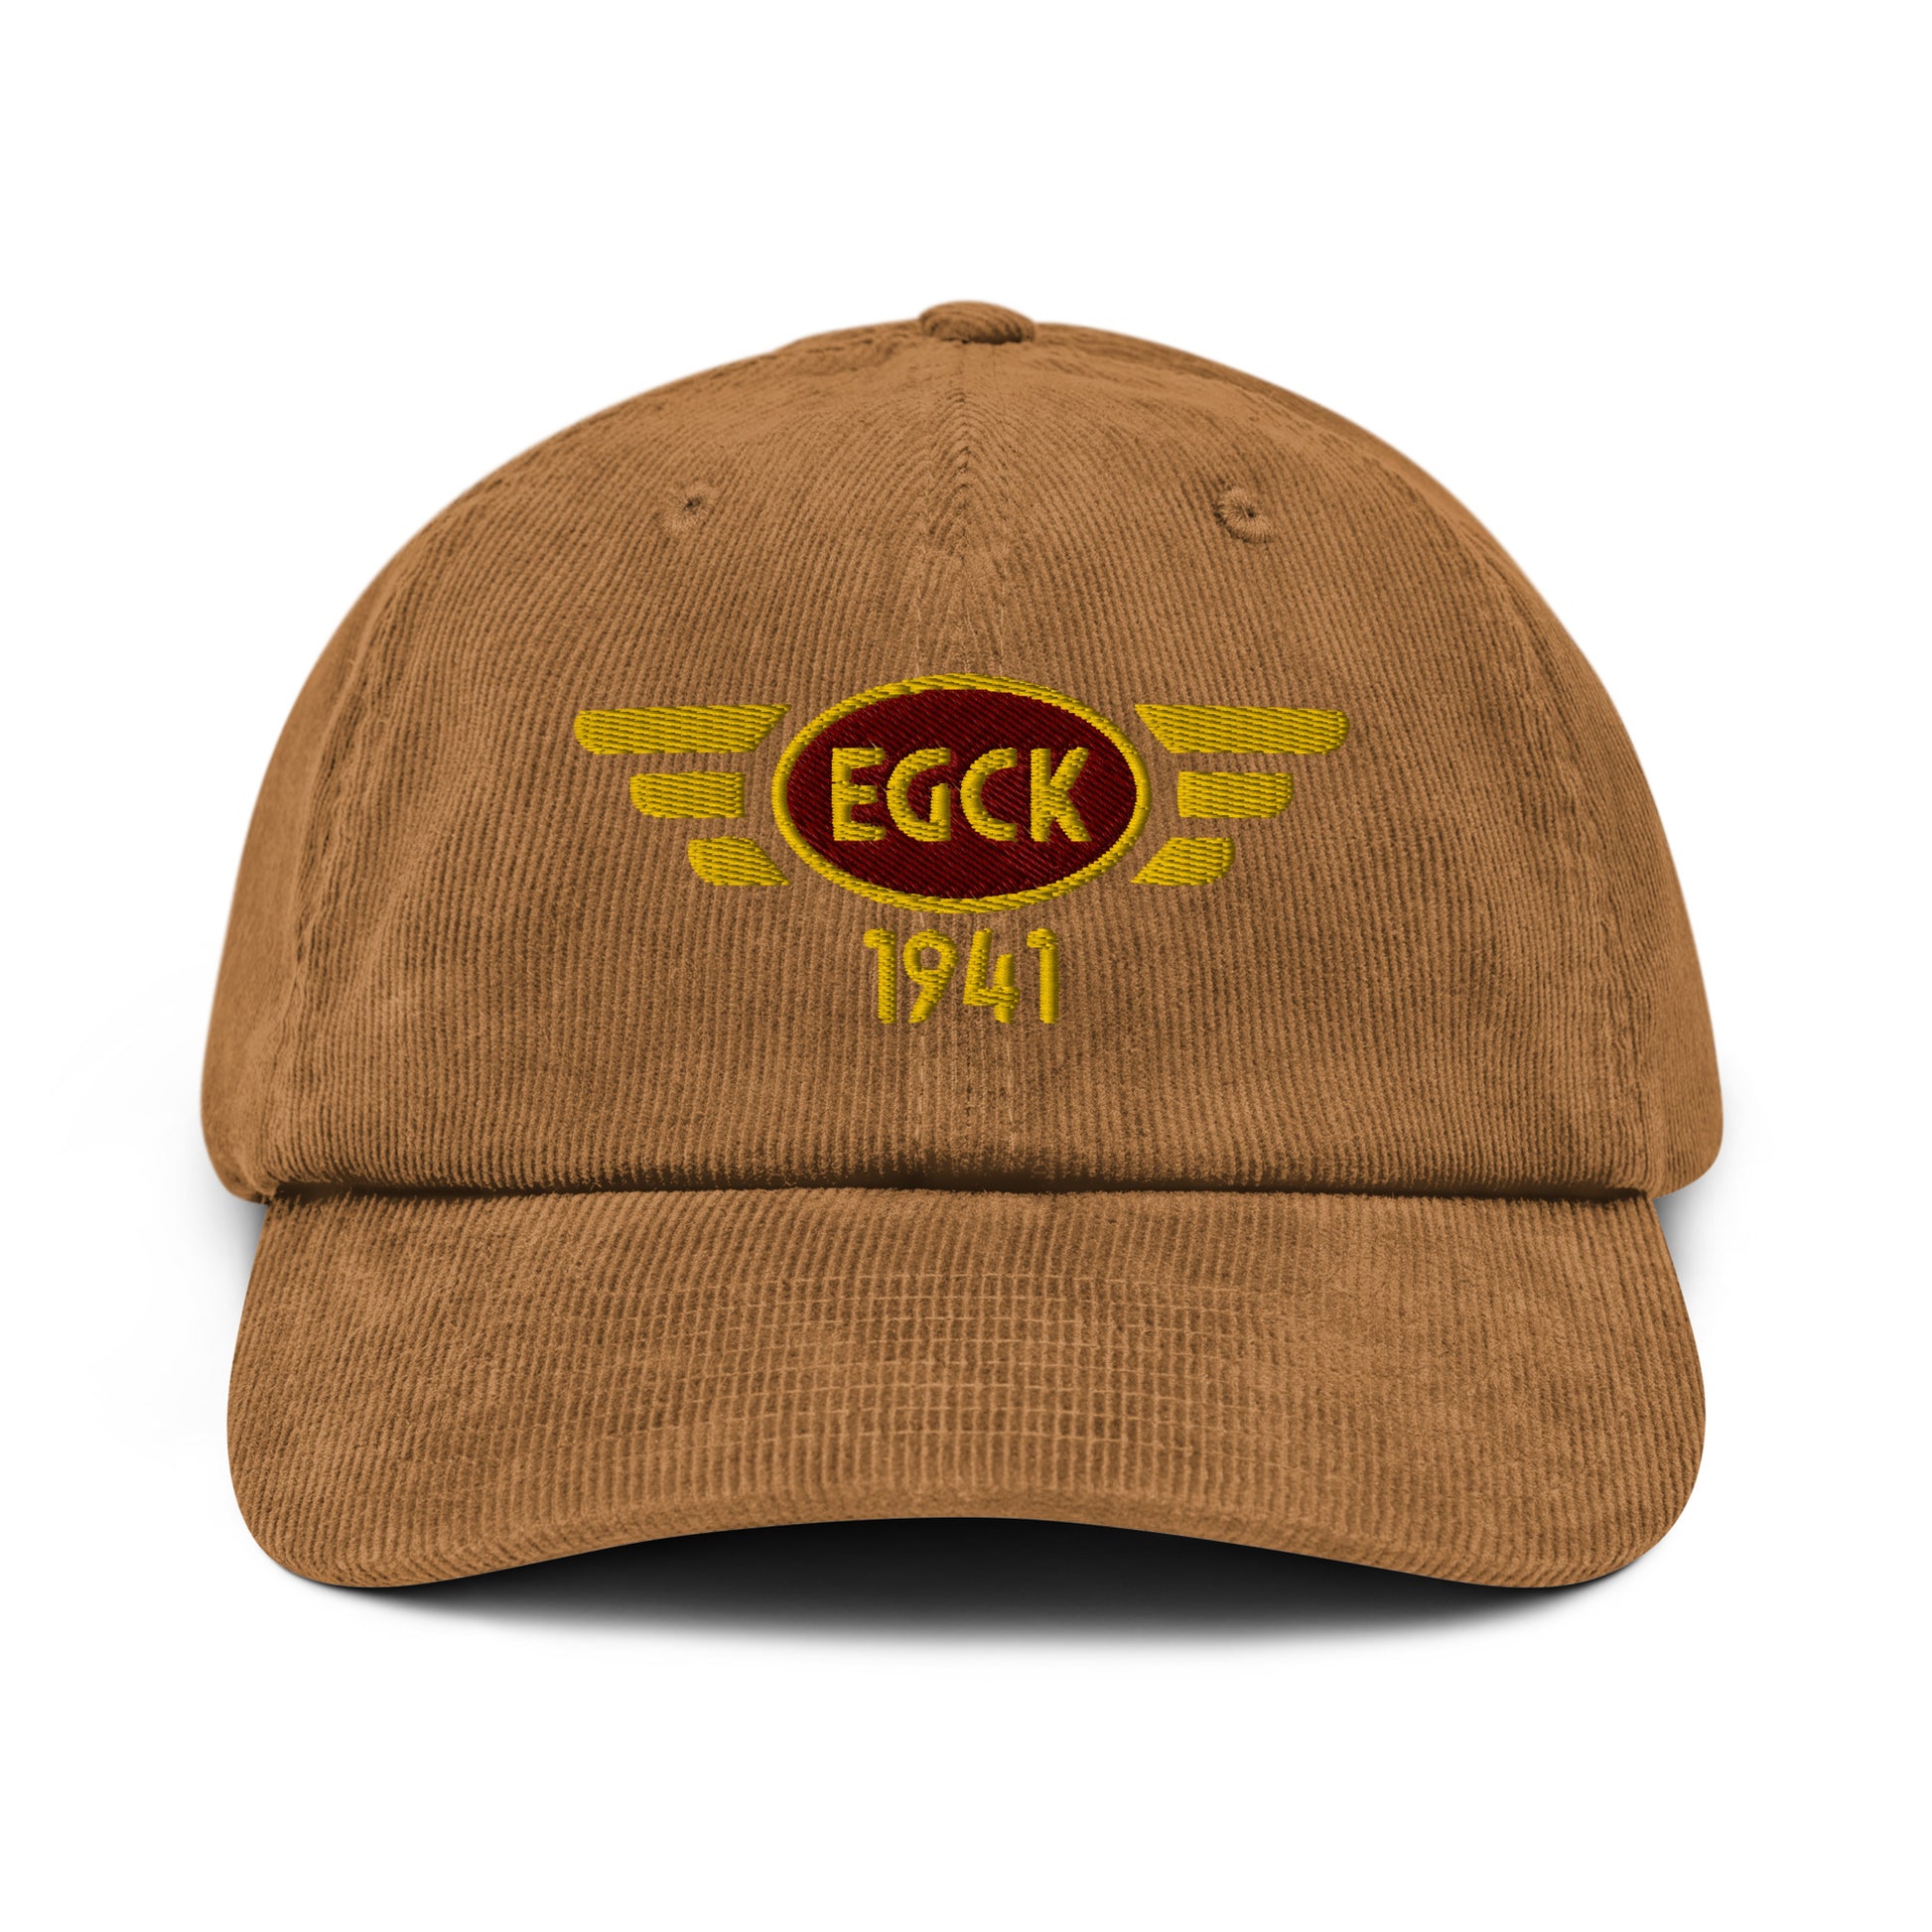 Fawn coloured corduroy baseball cap with embroidered vintage style aviation logo for Caernarfon Airport.